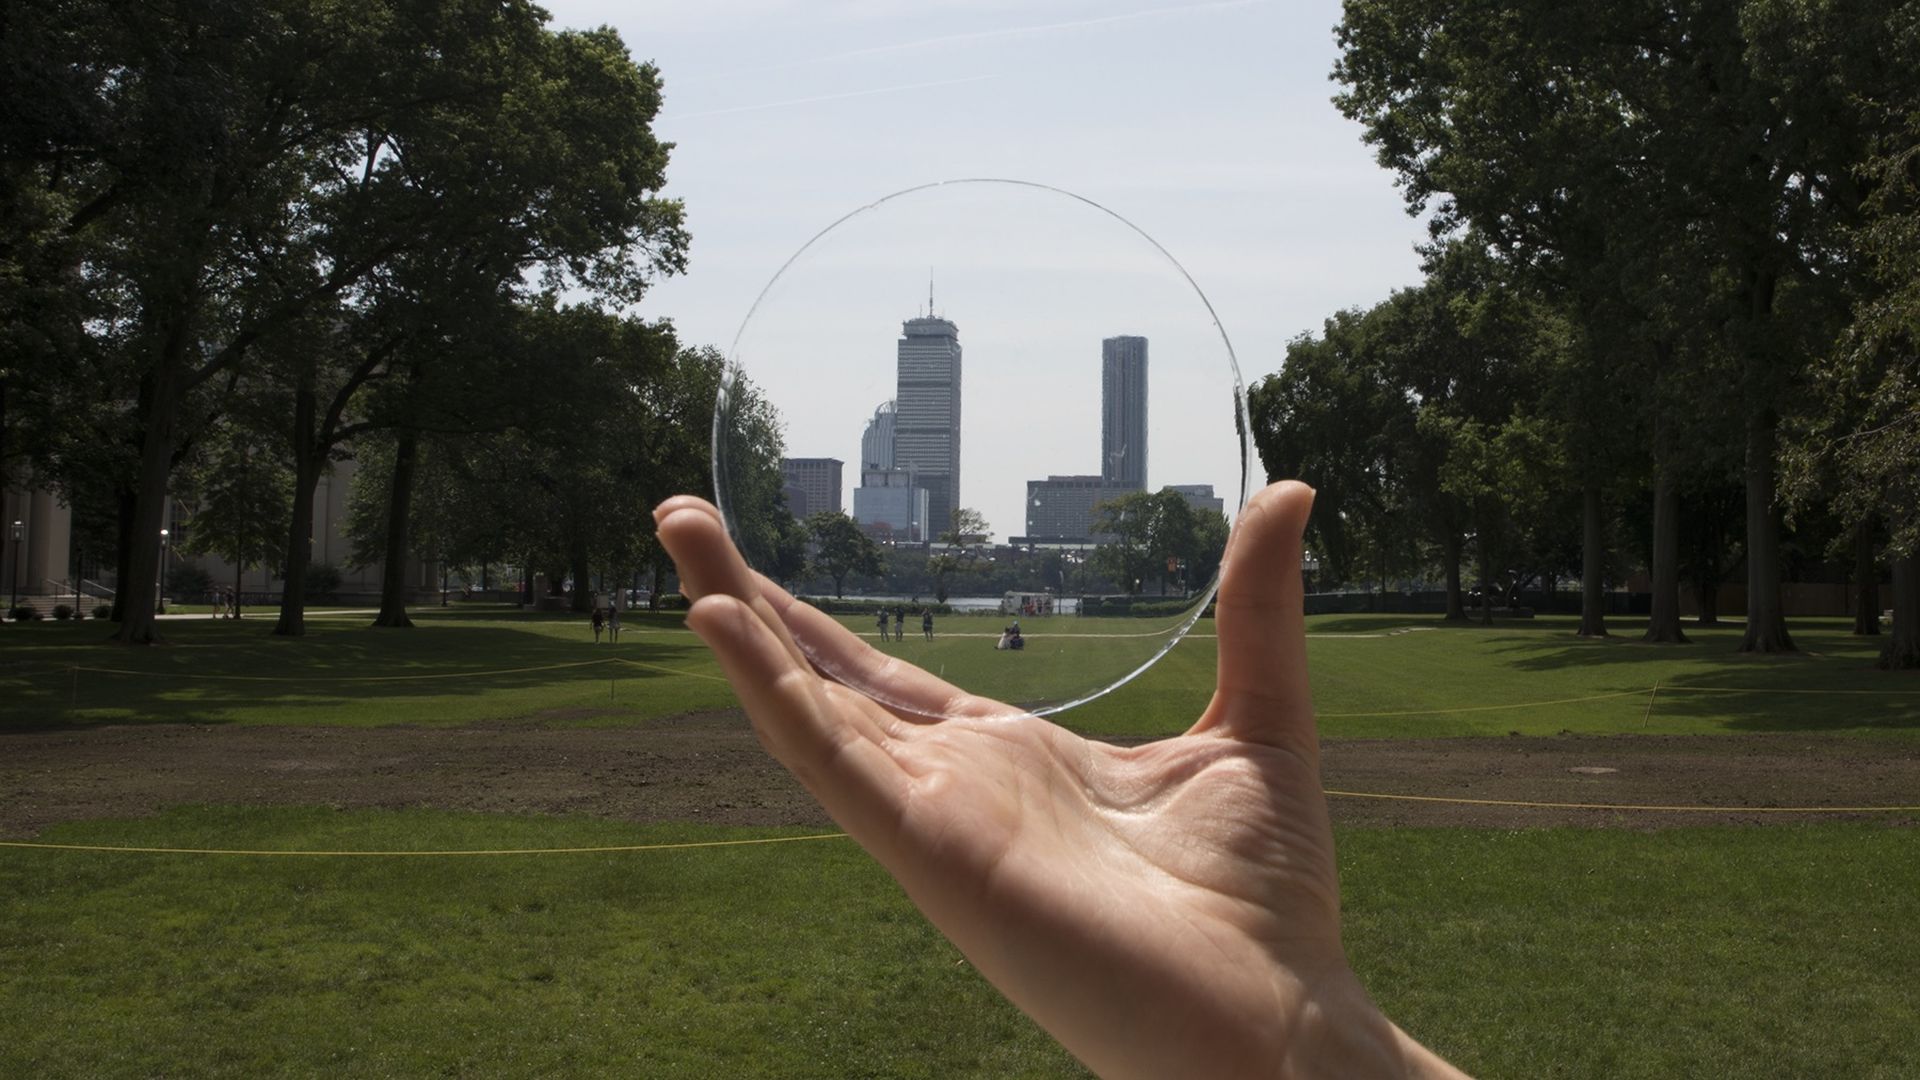 A circular slice of transparent aerogel is held in front of the Boston skyline.